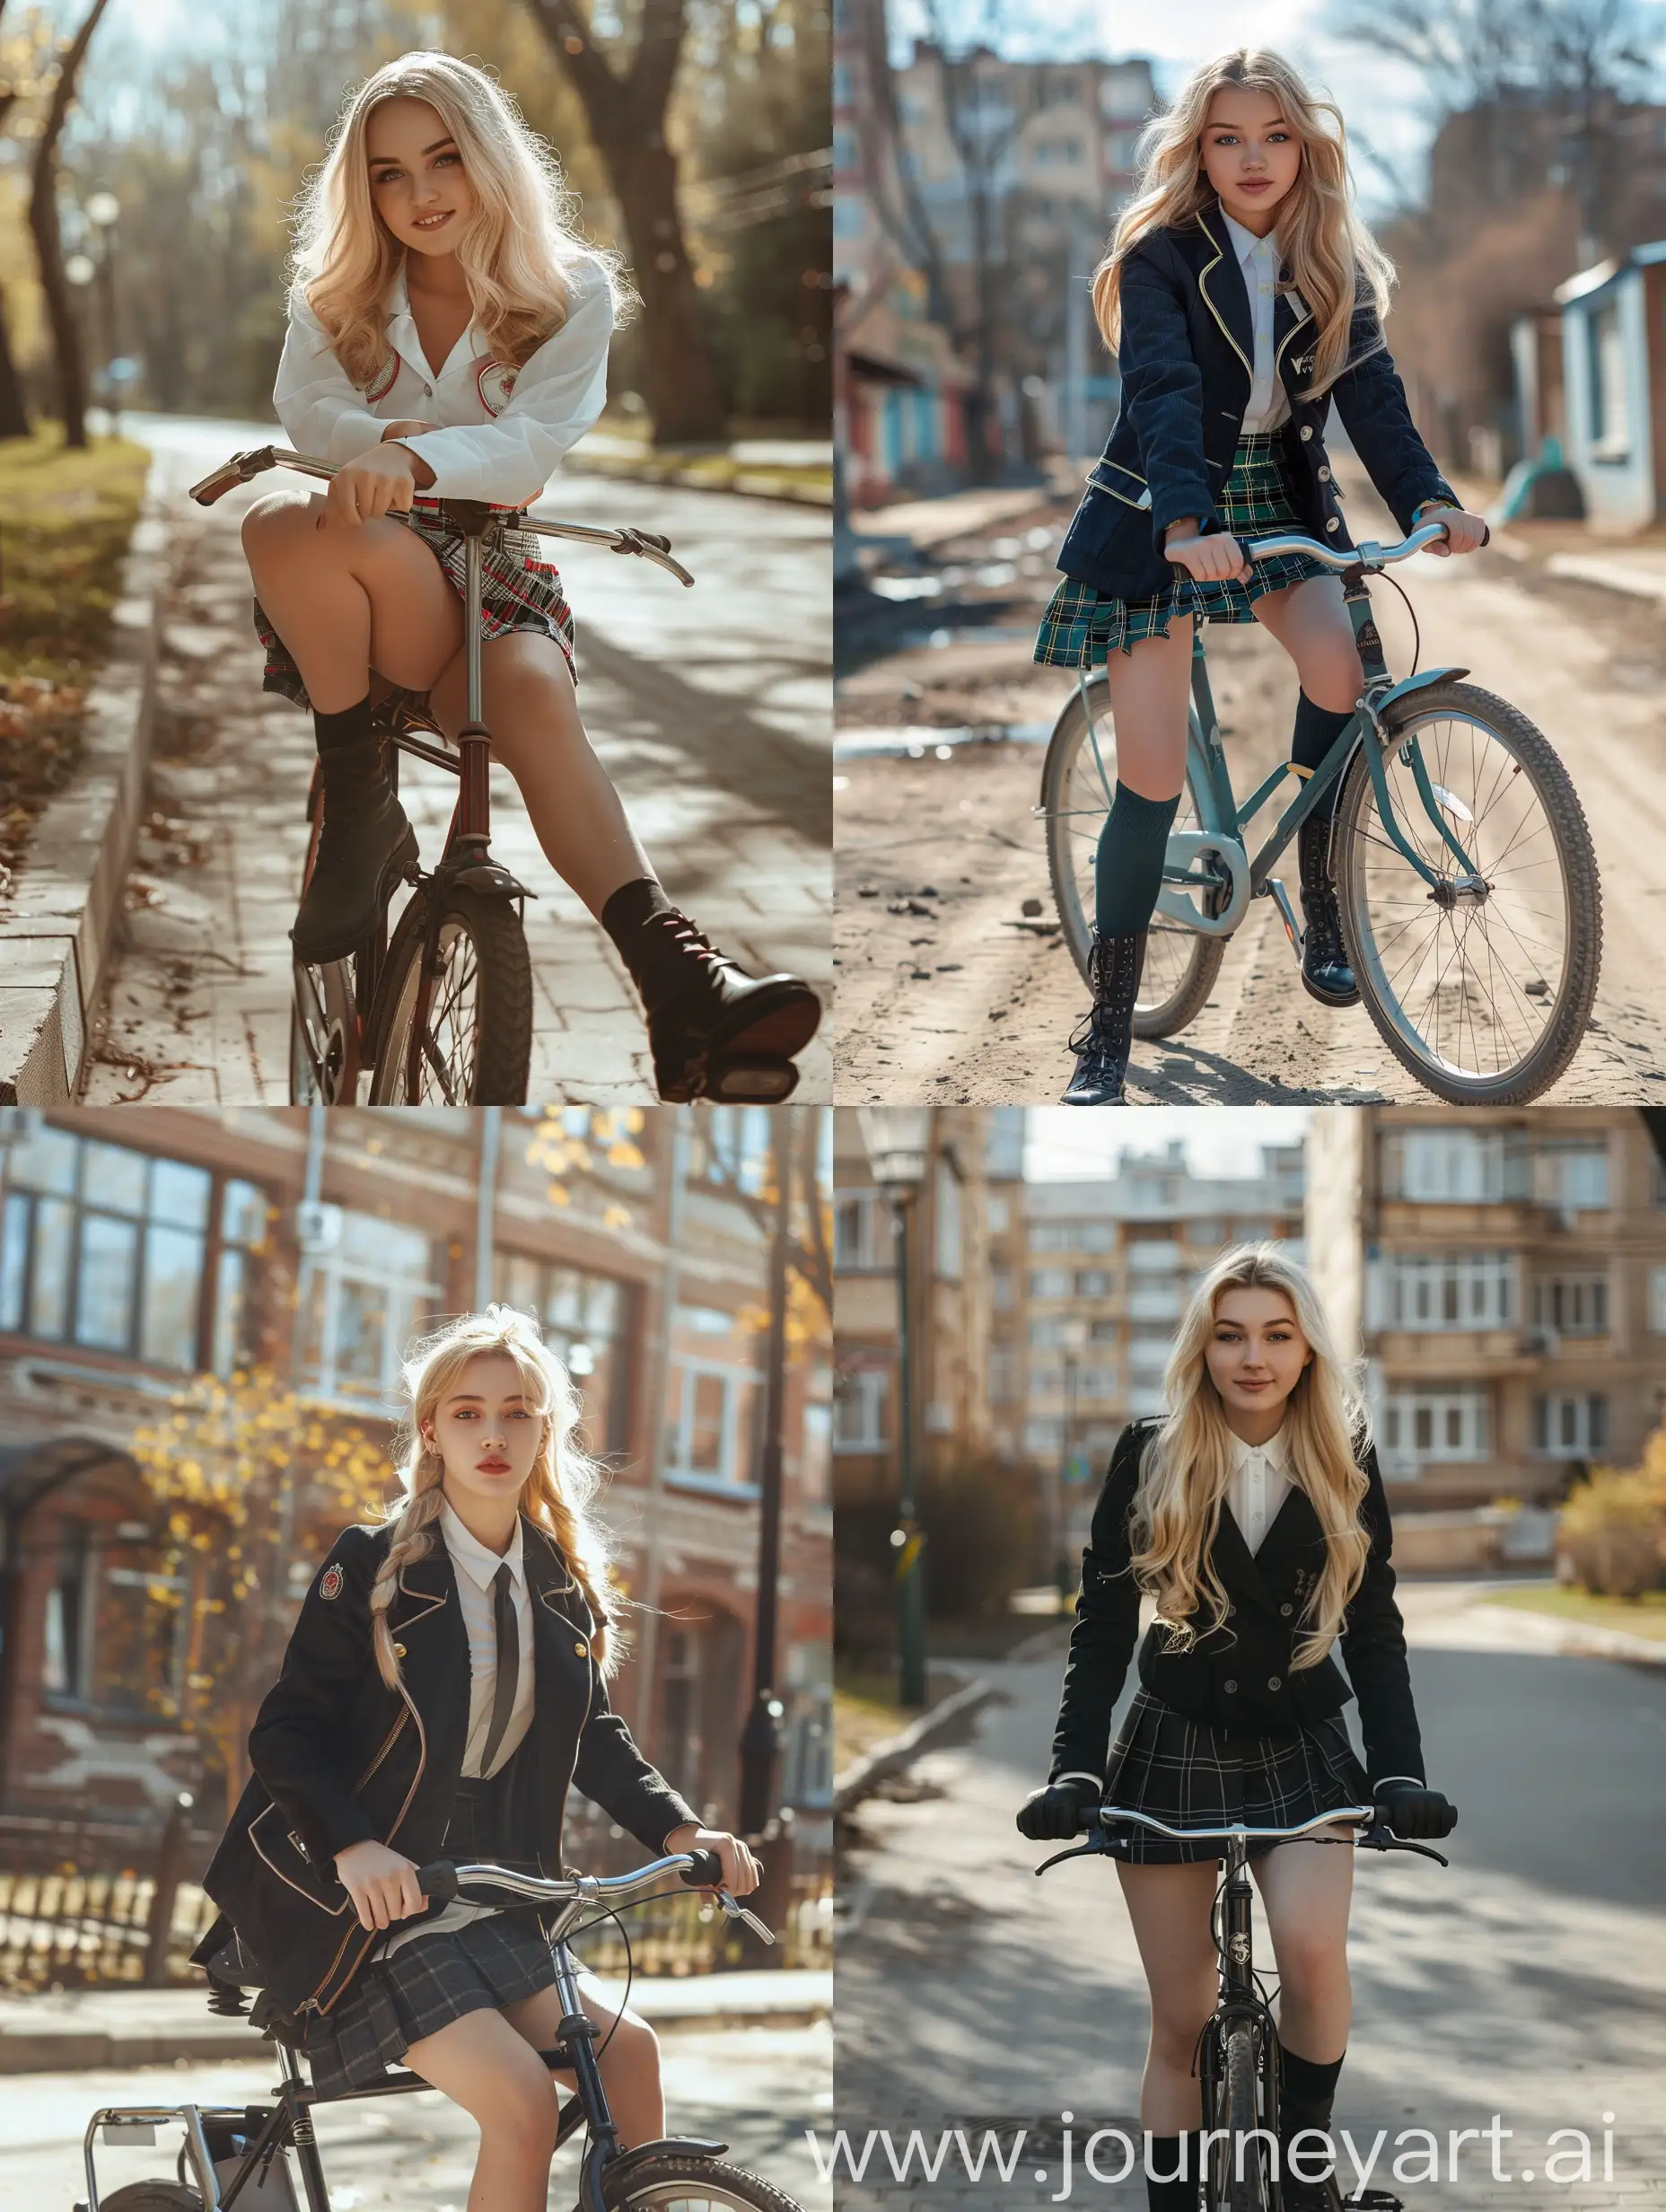 Young-Ukrainian-Woman-in-School-Uniform-Riding-Bicycle-on-Sunny-Day